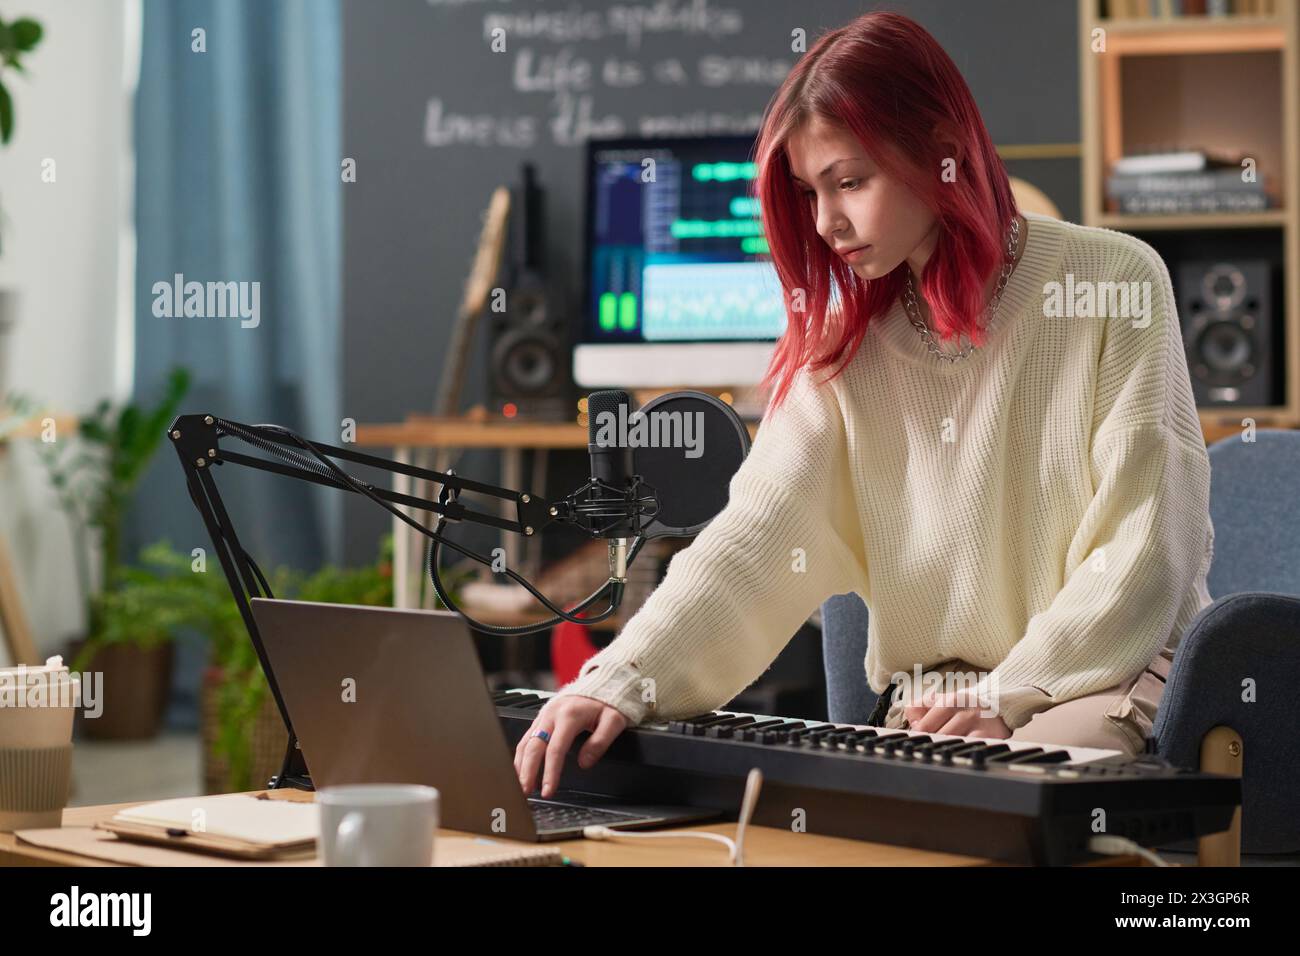 Cute teenage girl bending over desk with electric piano and laptop and looking at device screen while pressing key during sound recording Stock Photo